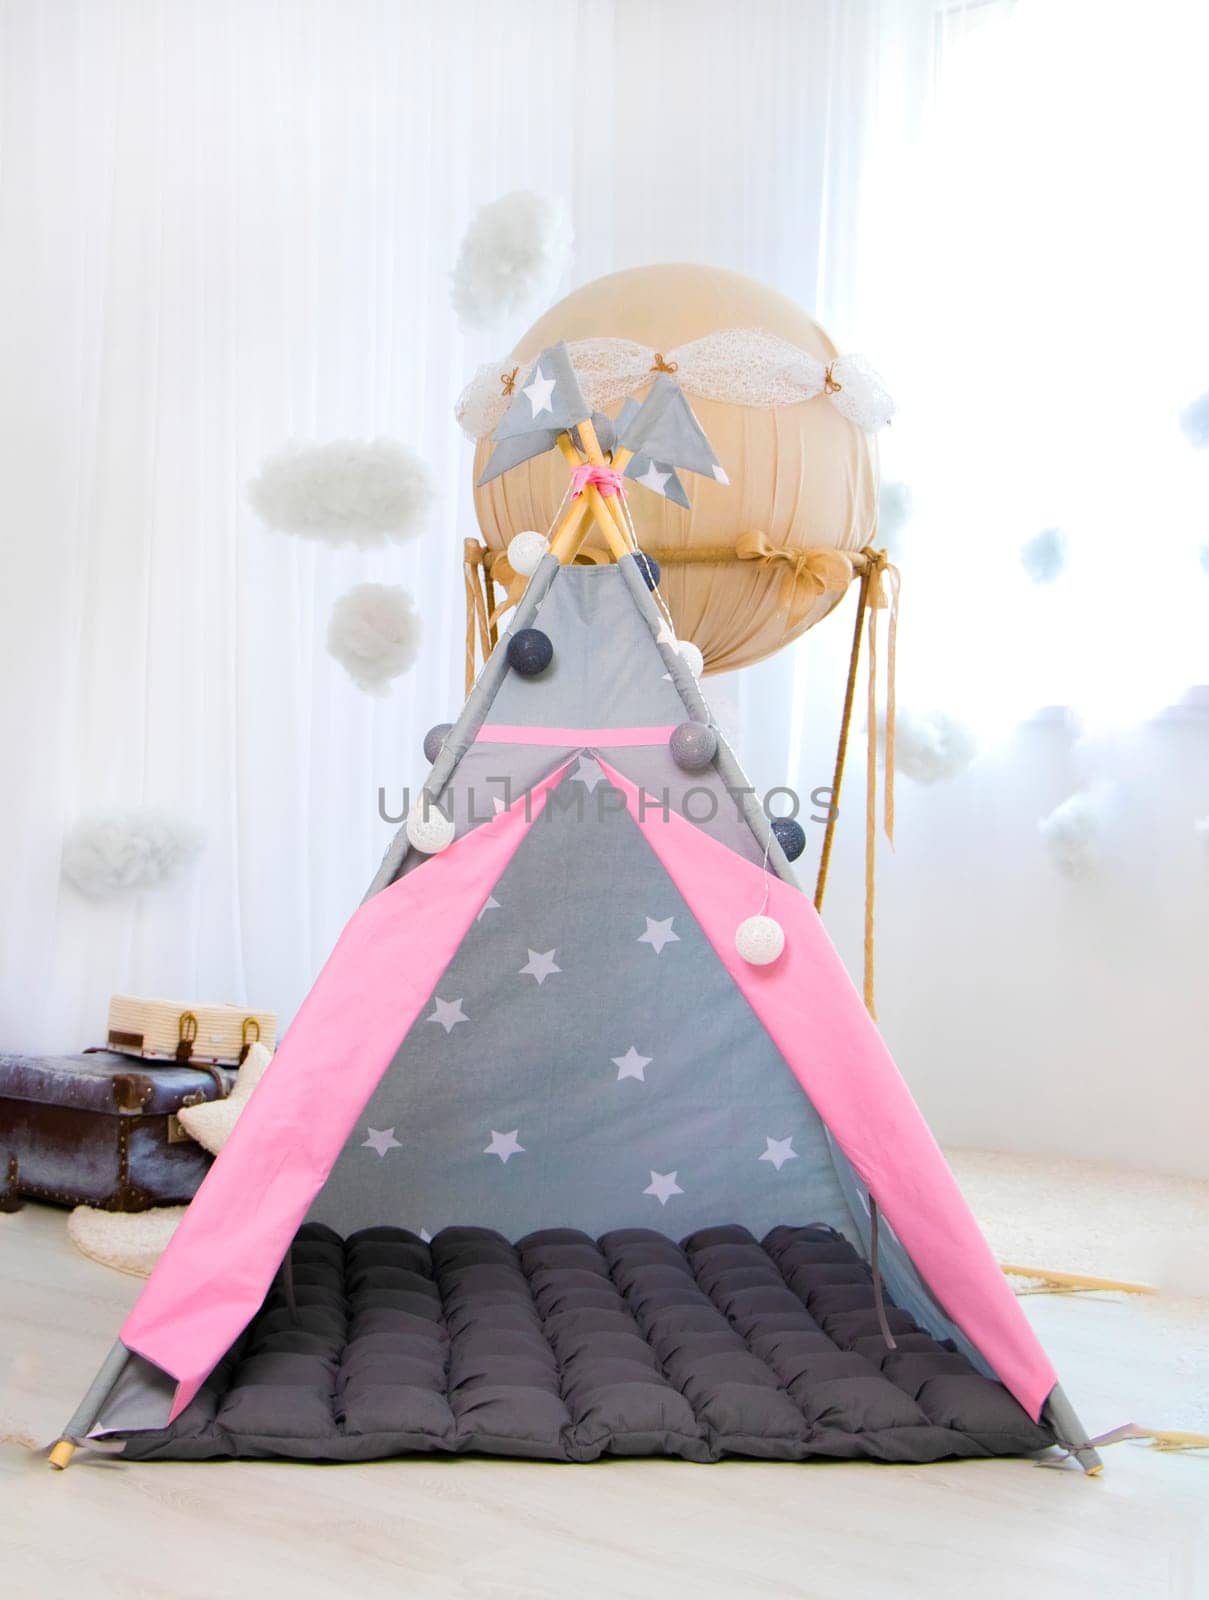 Playroom with Teepee. Modern room interior with play tent for child. pink children's wigwam in the room on the floor Scandinavian style with decor. High quality photo